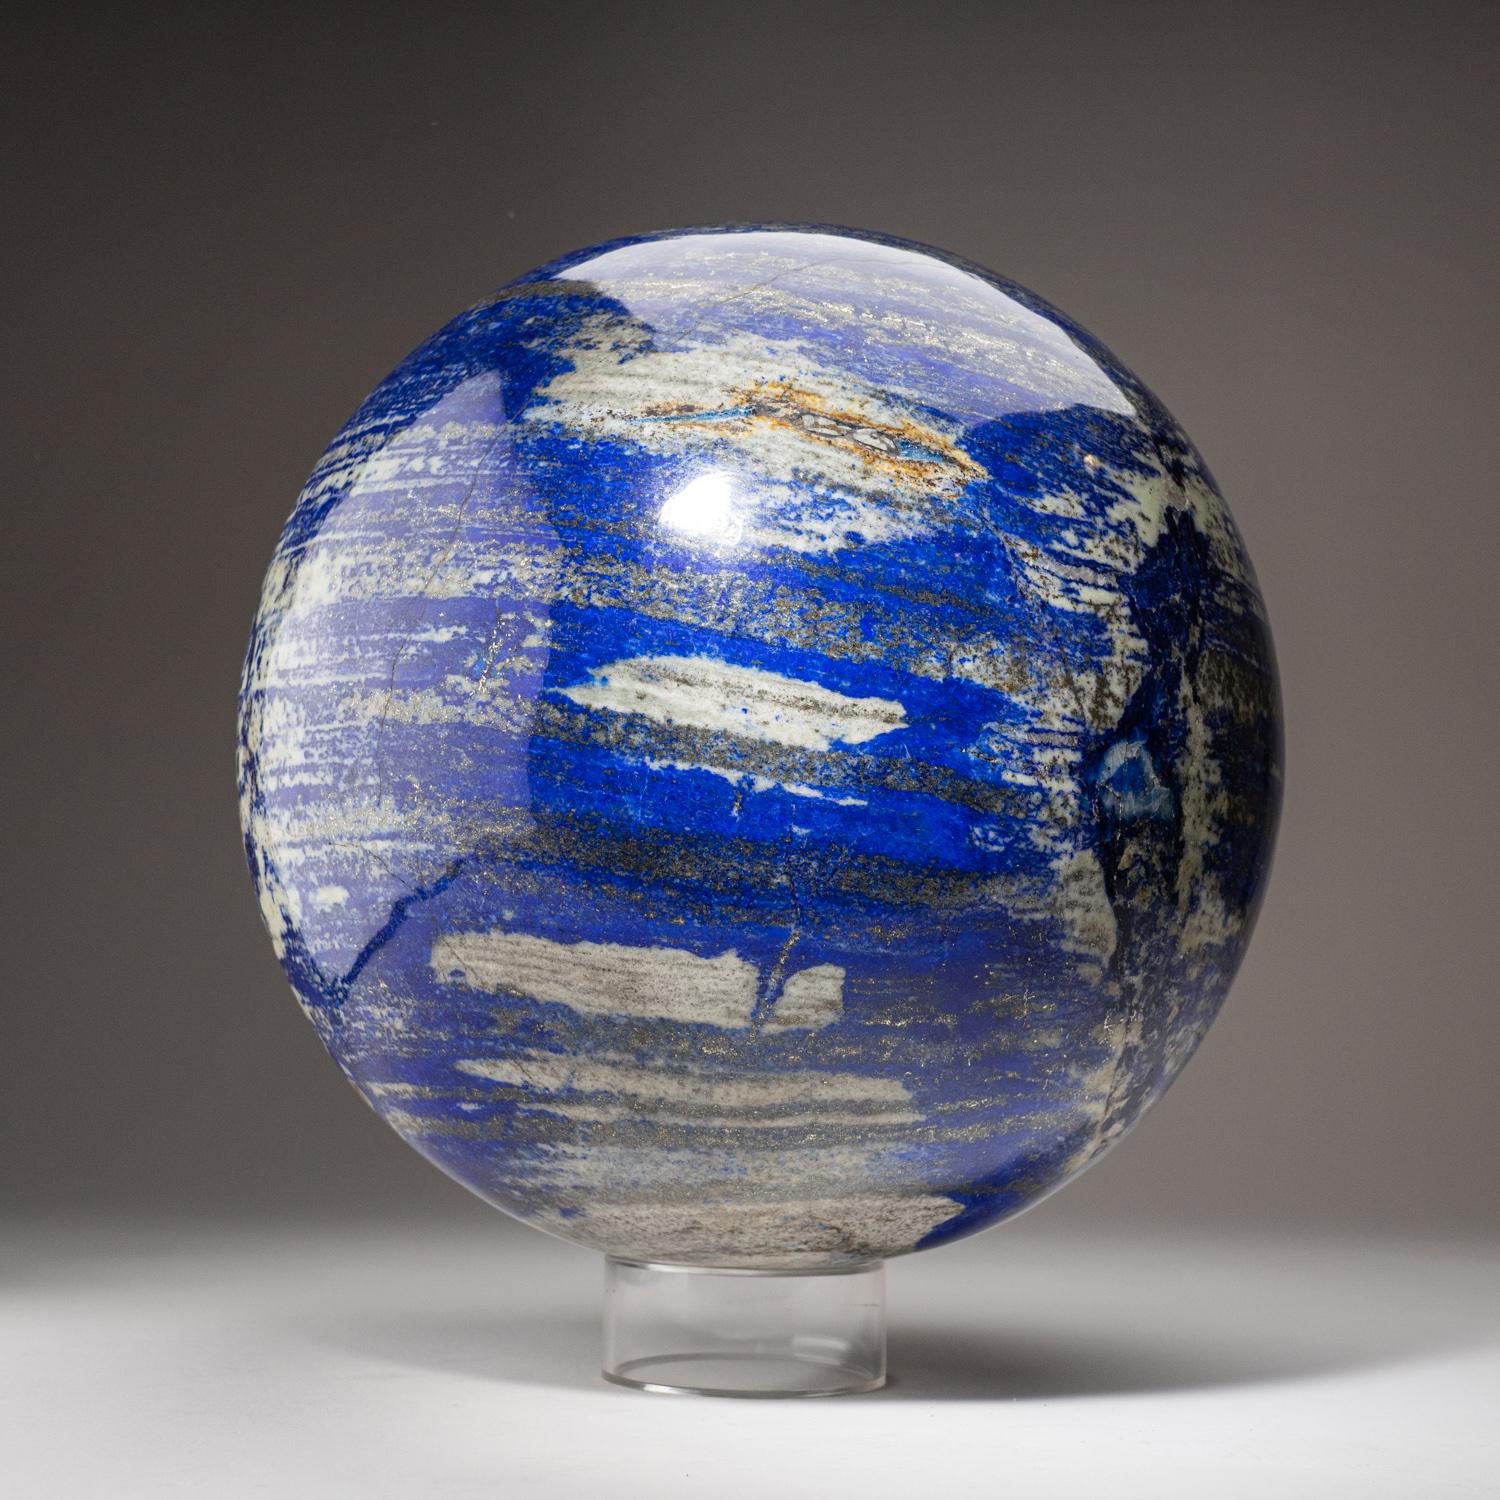 Genuine Polished Lapis Lazuli Sphere from Afghanistan (12